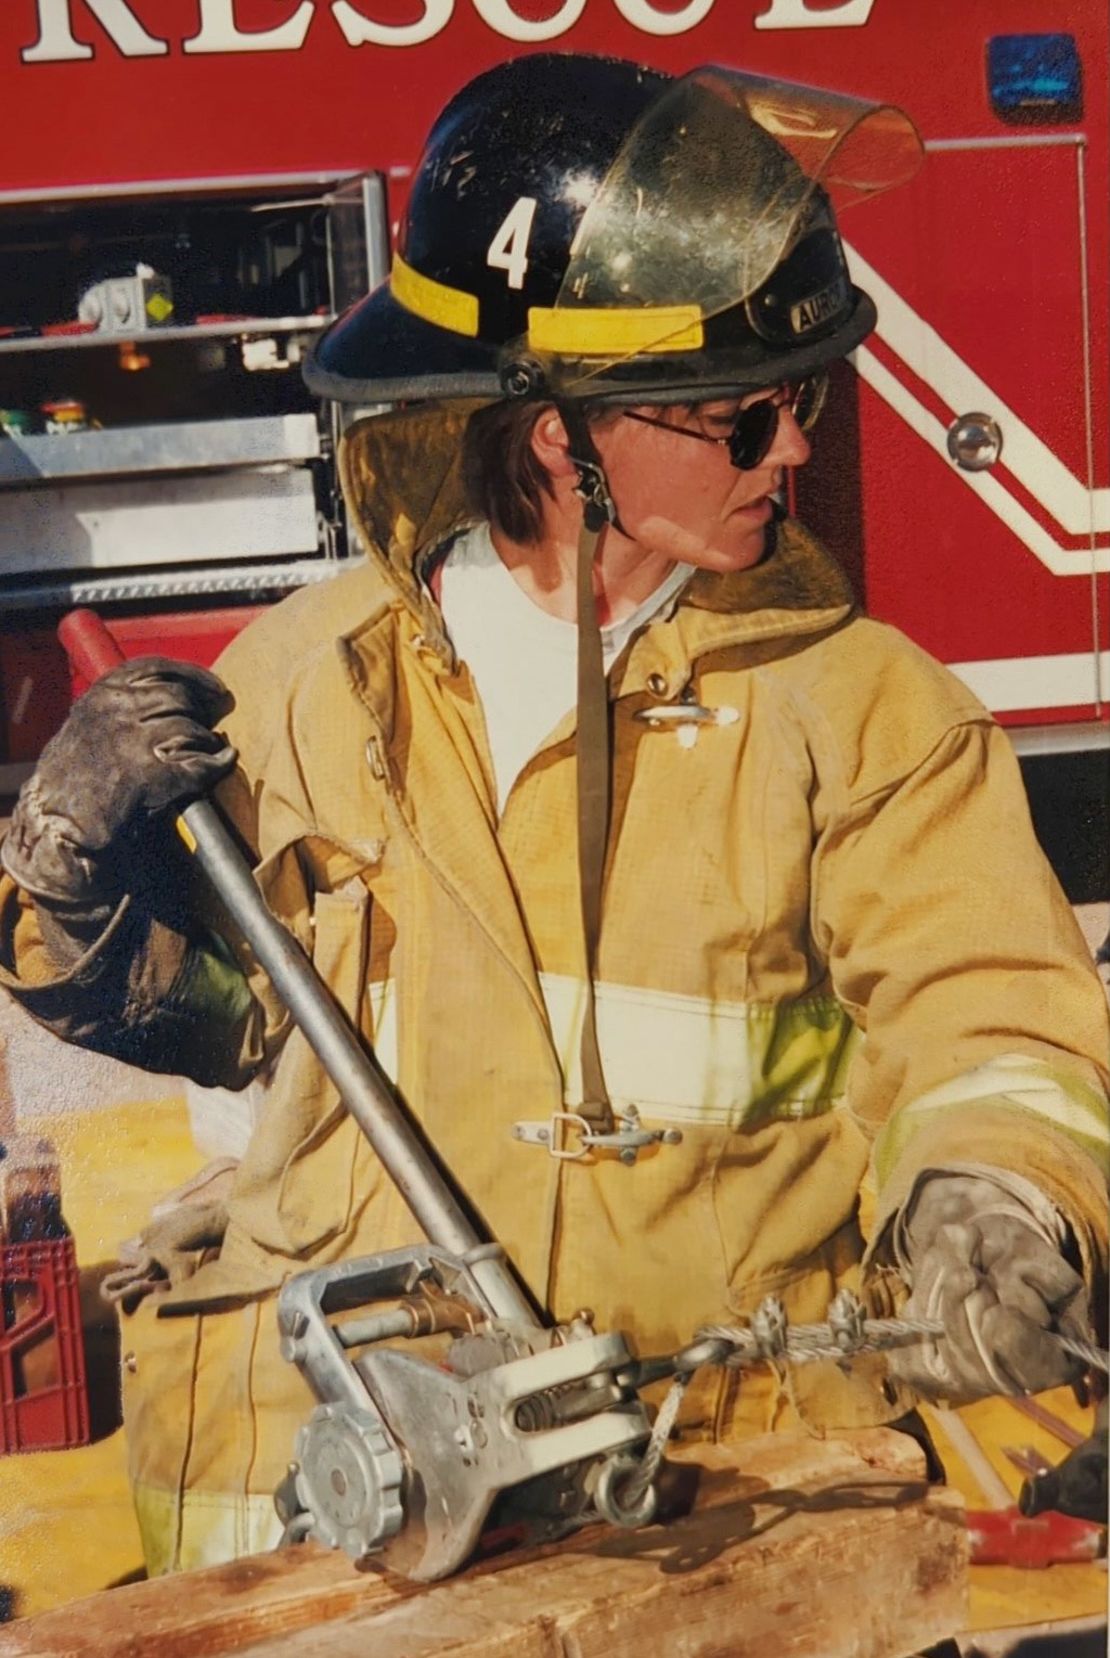 Deanne Criswell working as a firefighter in Aurora, Colorado.